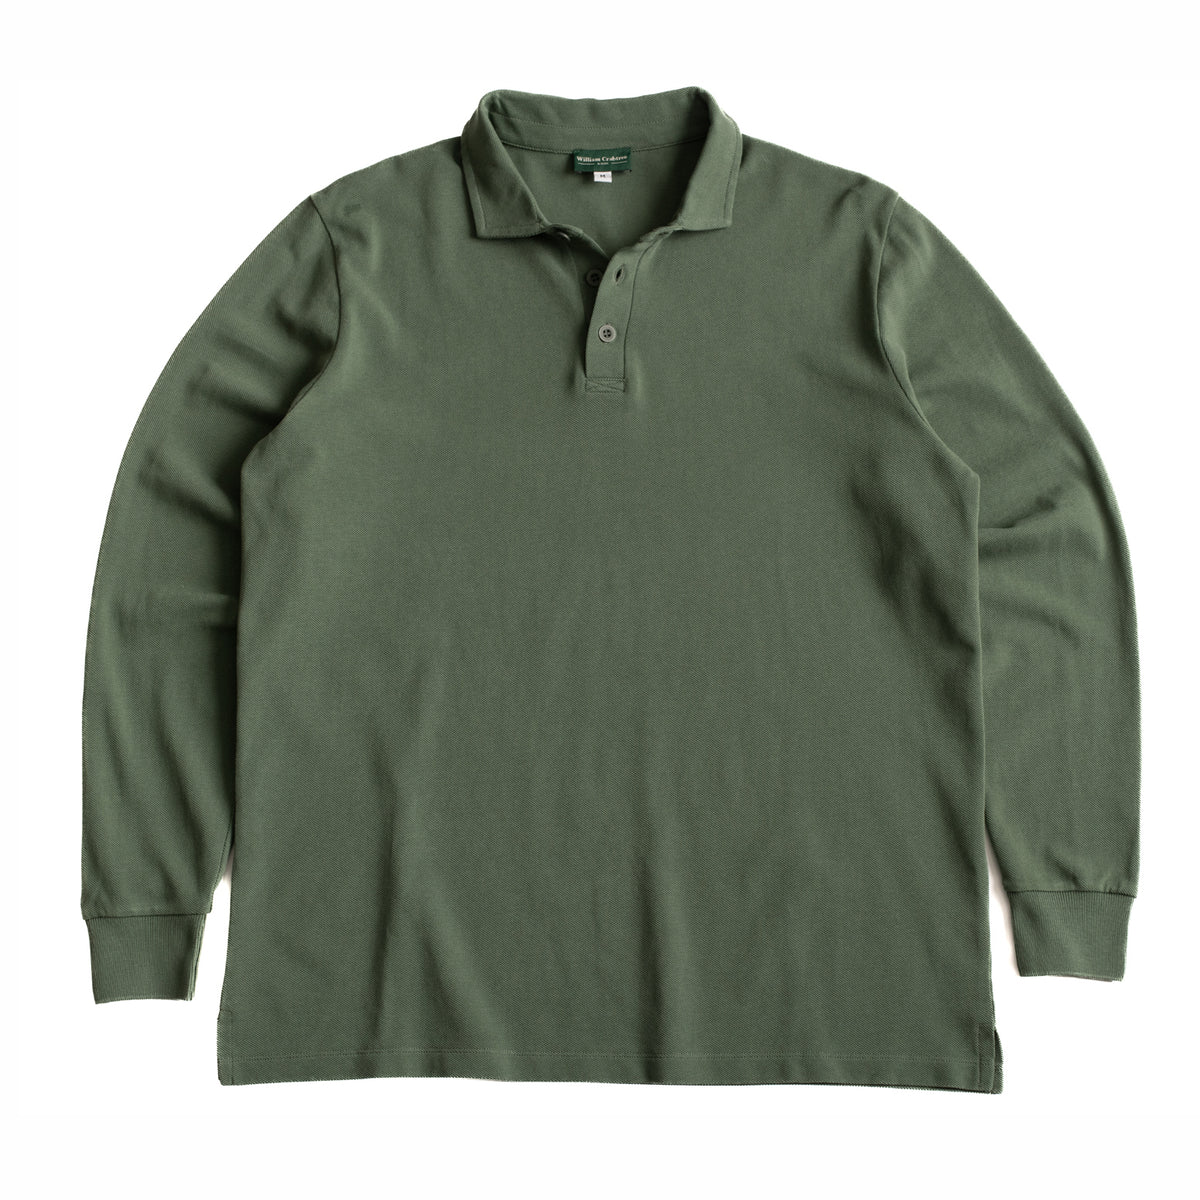 Olive Green Long Sleeved Polo Shirt